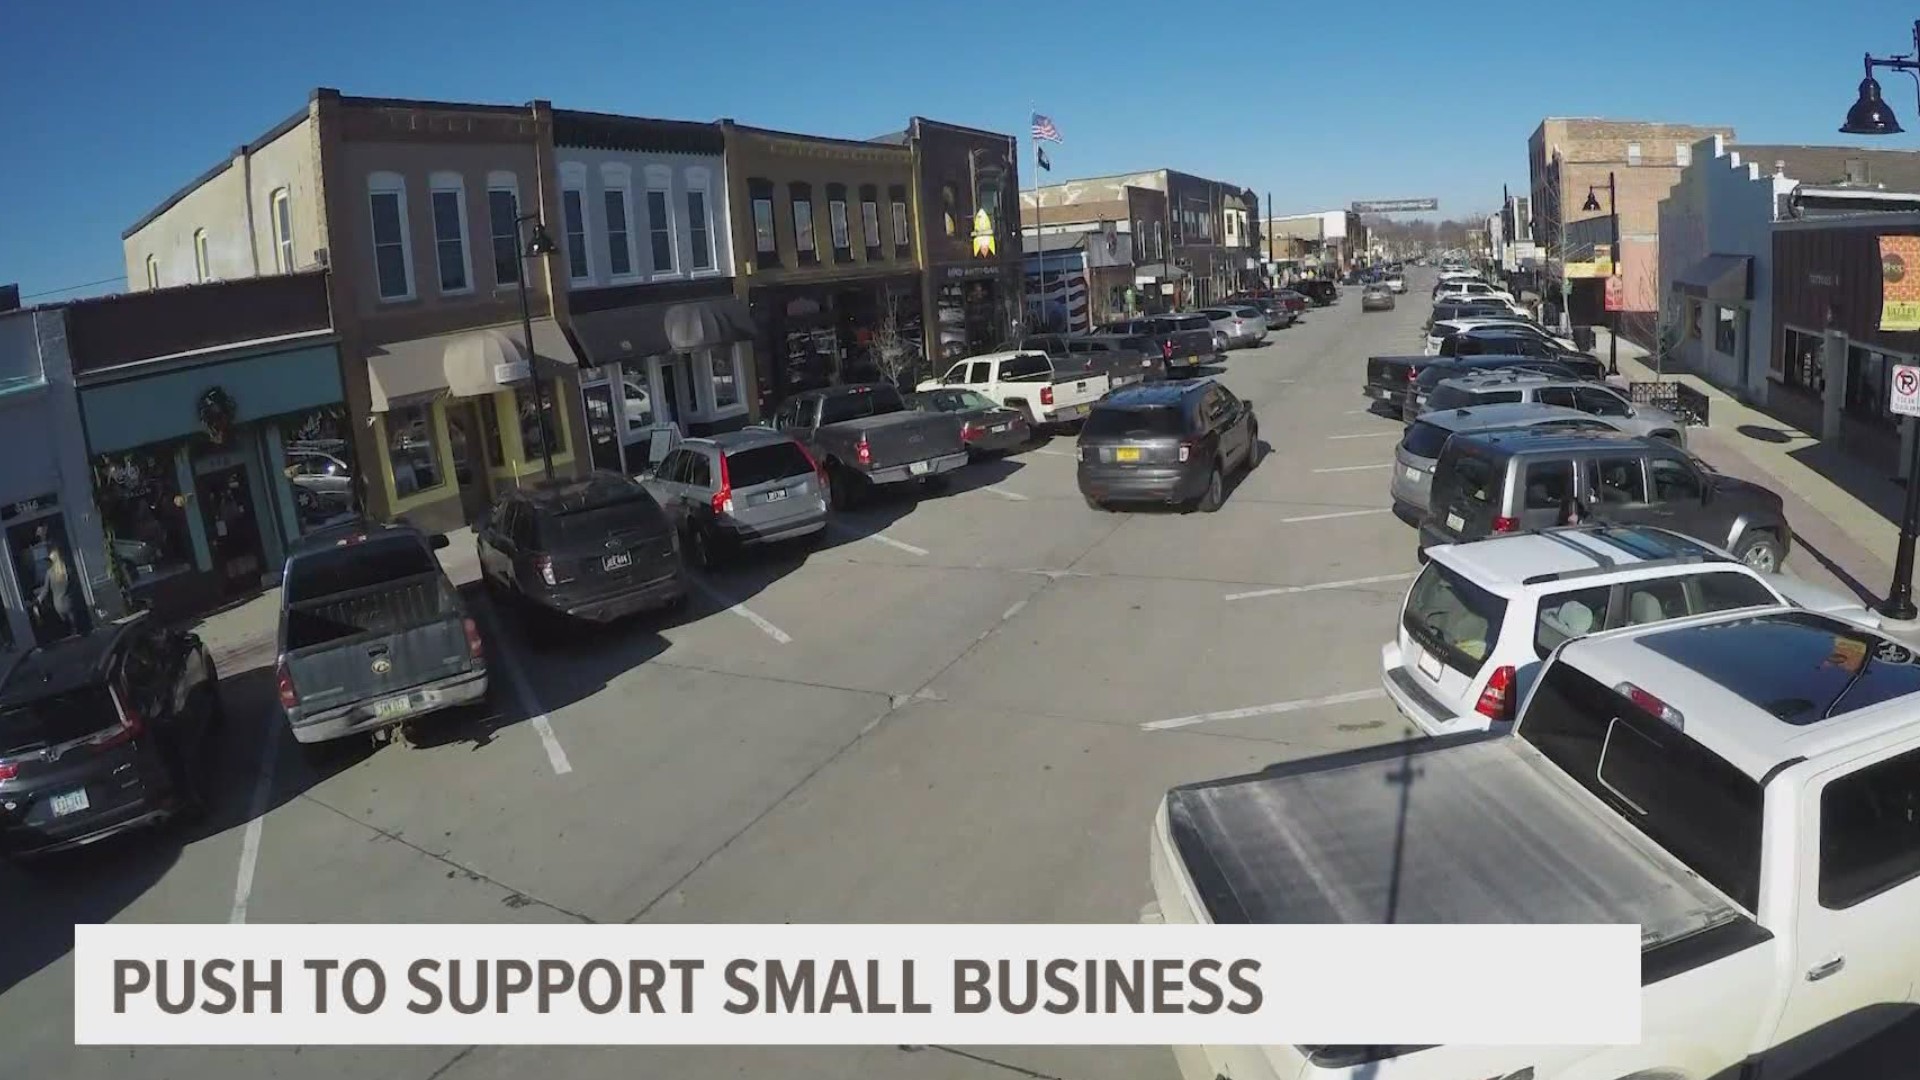 Between Black Friday and Small Business Saturday, areas like Valley Junction's Main Street are counting on lots of customers.